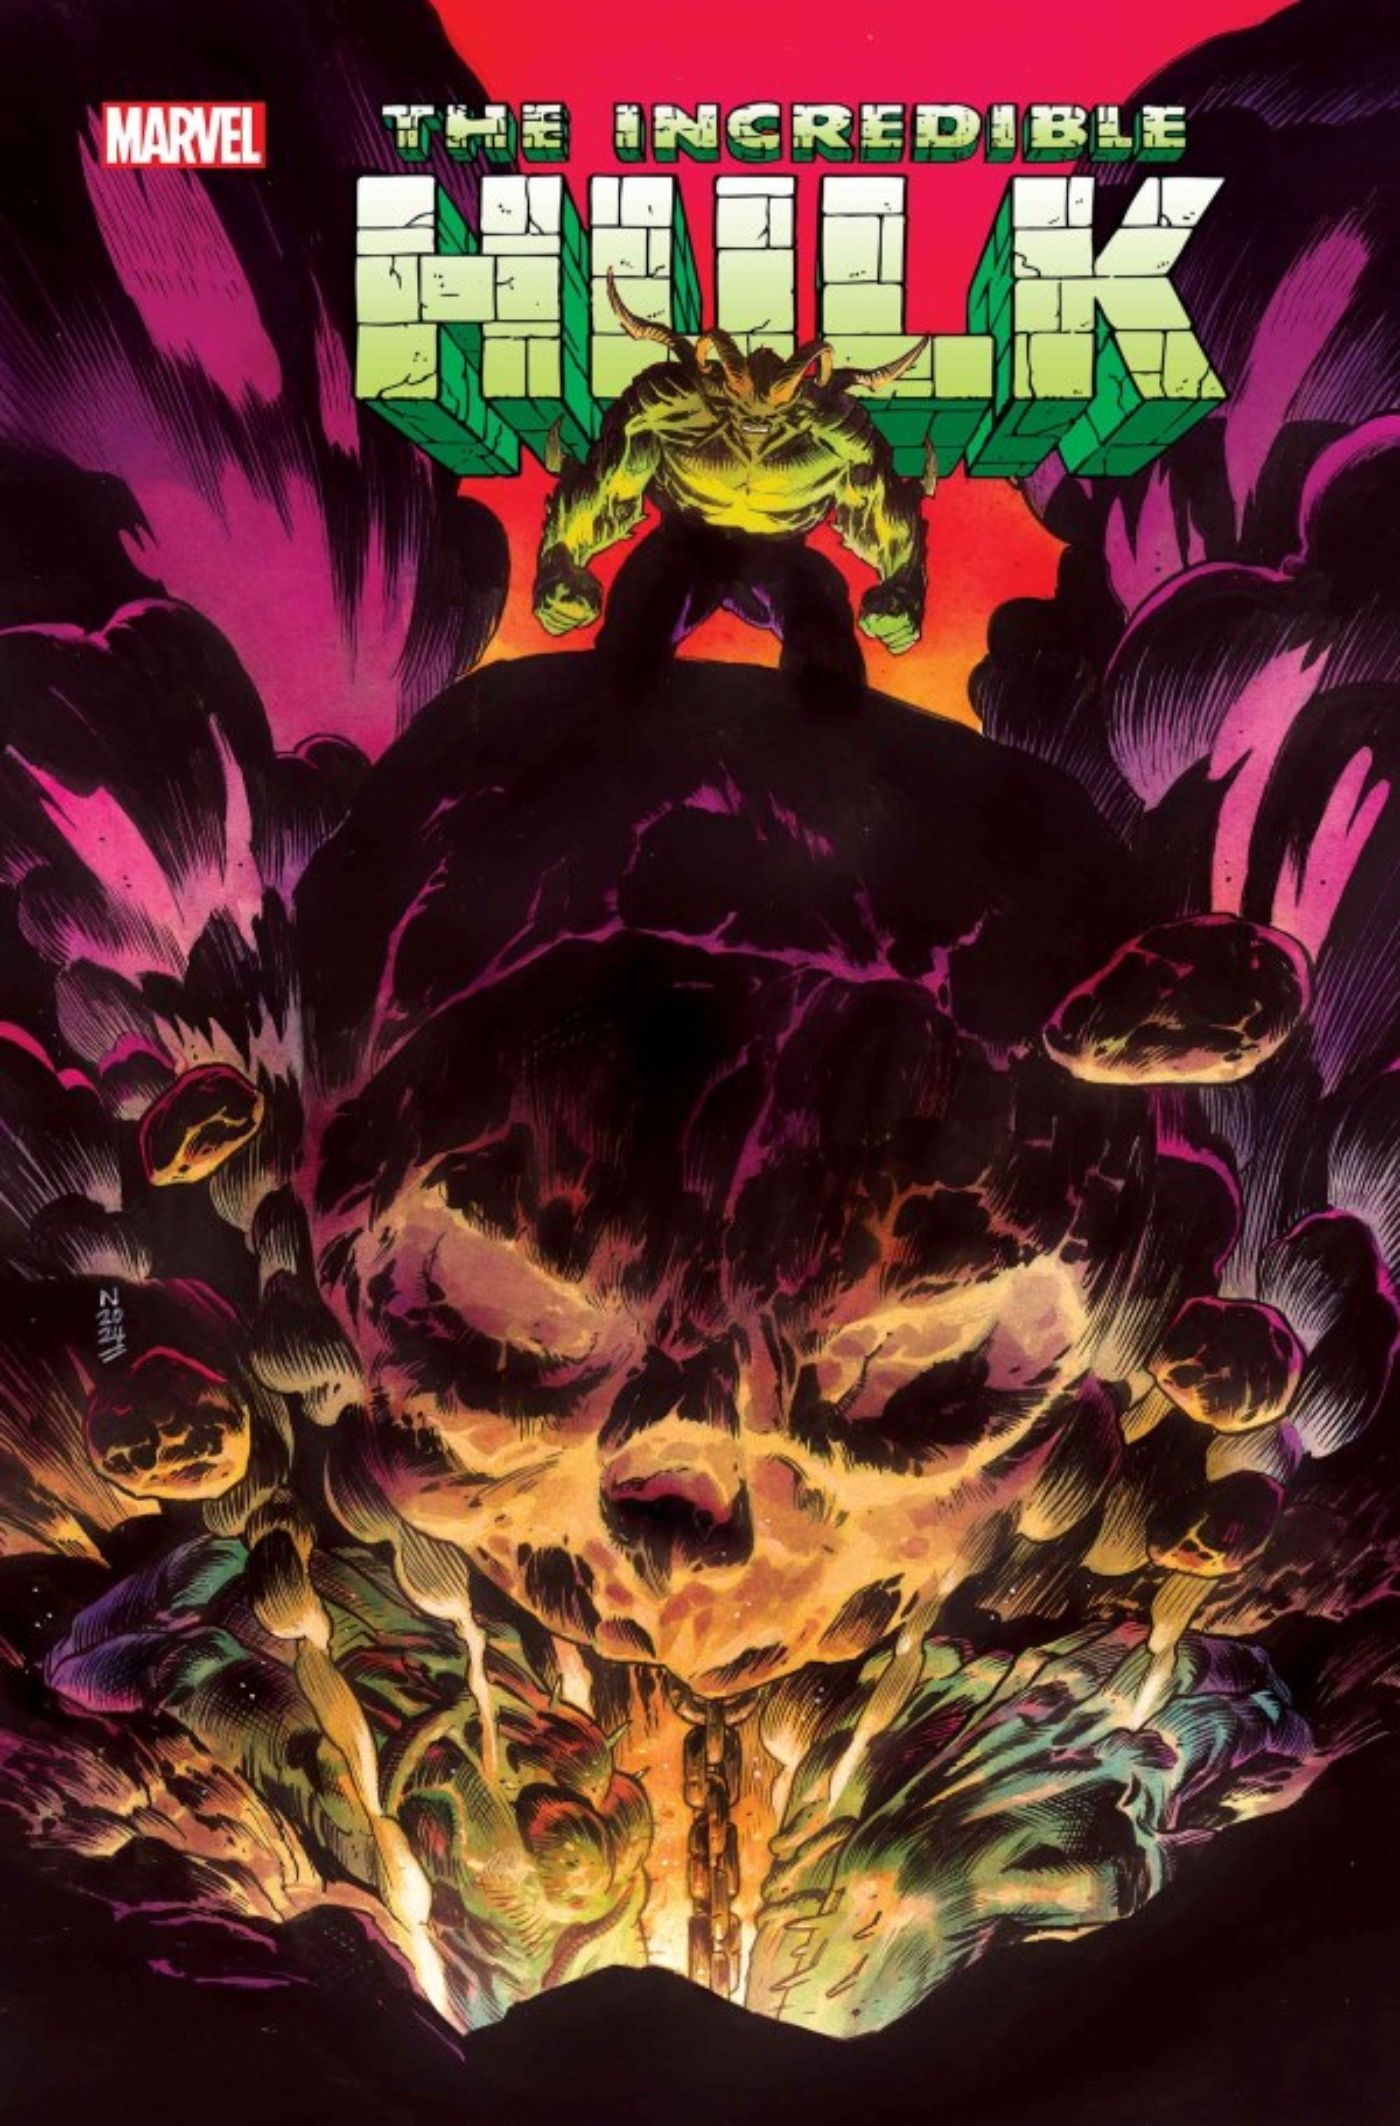 Cover for The Incredible Hulk #16 featuring the first Hulk, Enkidu.